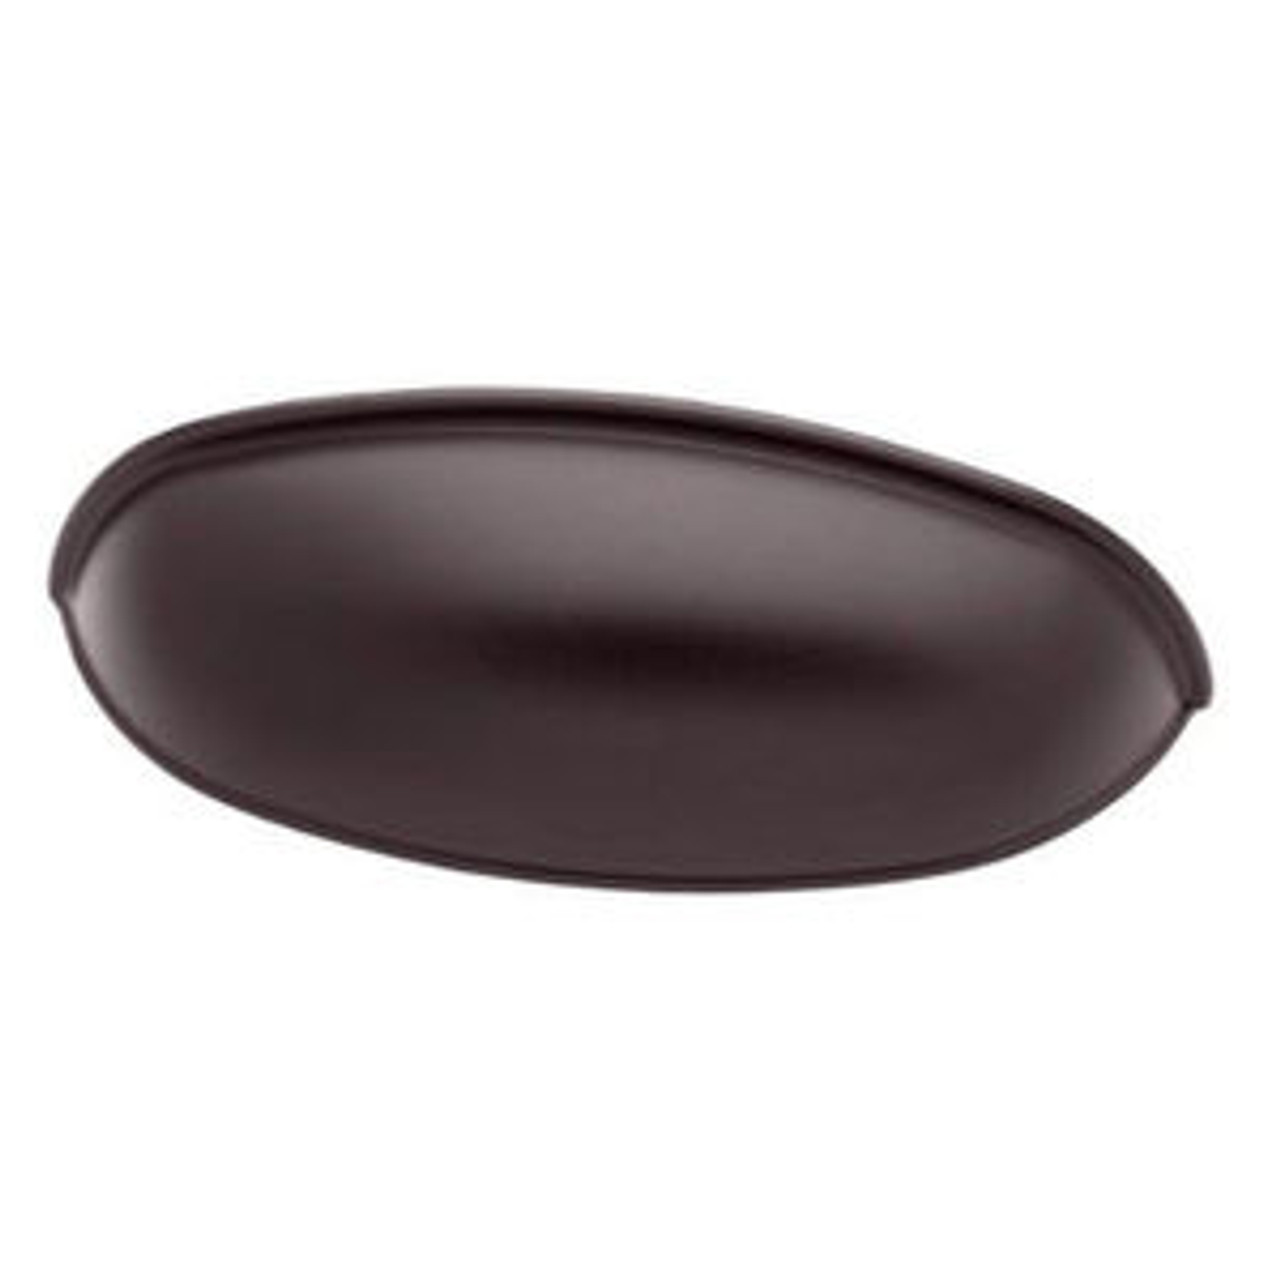 PN1053L-OB3 Oil Rubbed Bronze 2 1/2" & 3" Cup Cabinet Drawer Pull